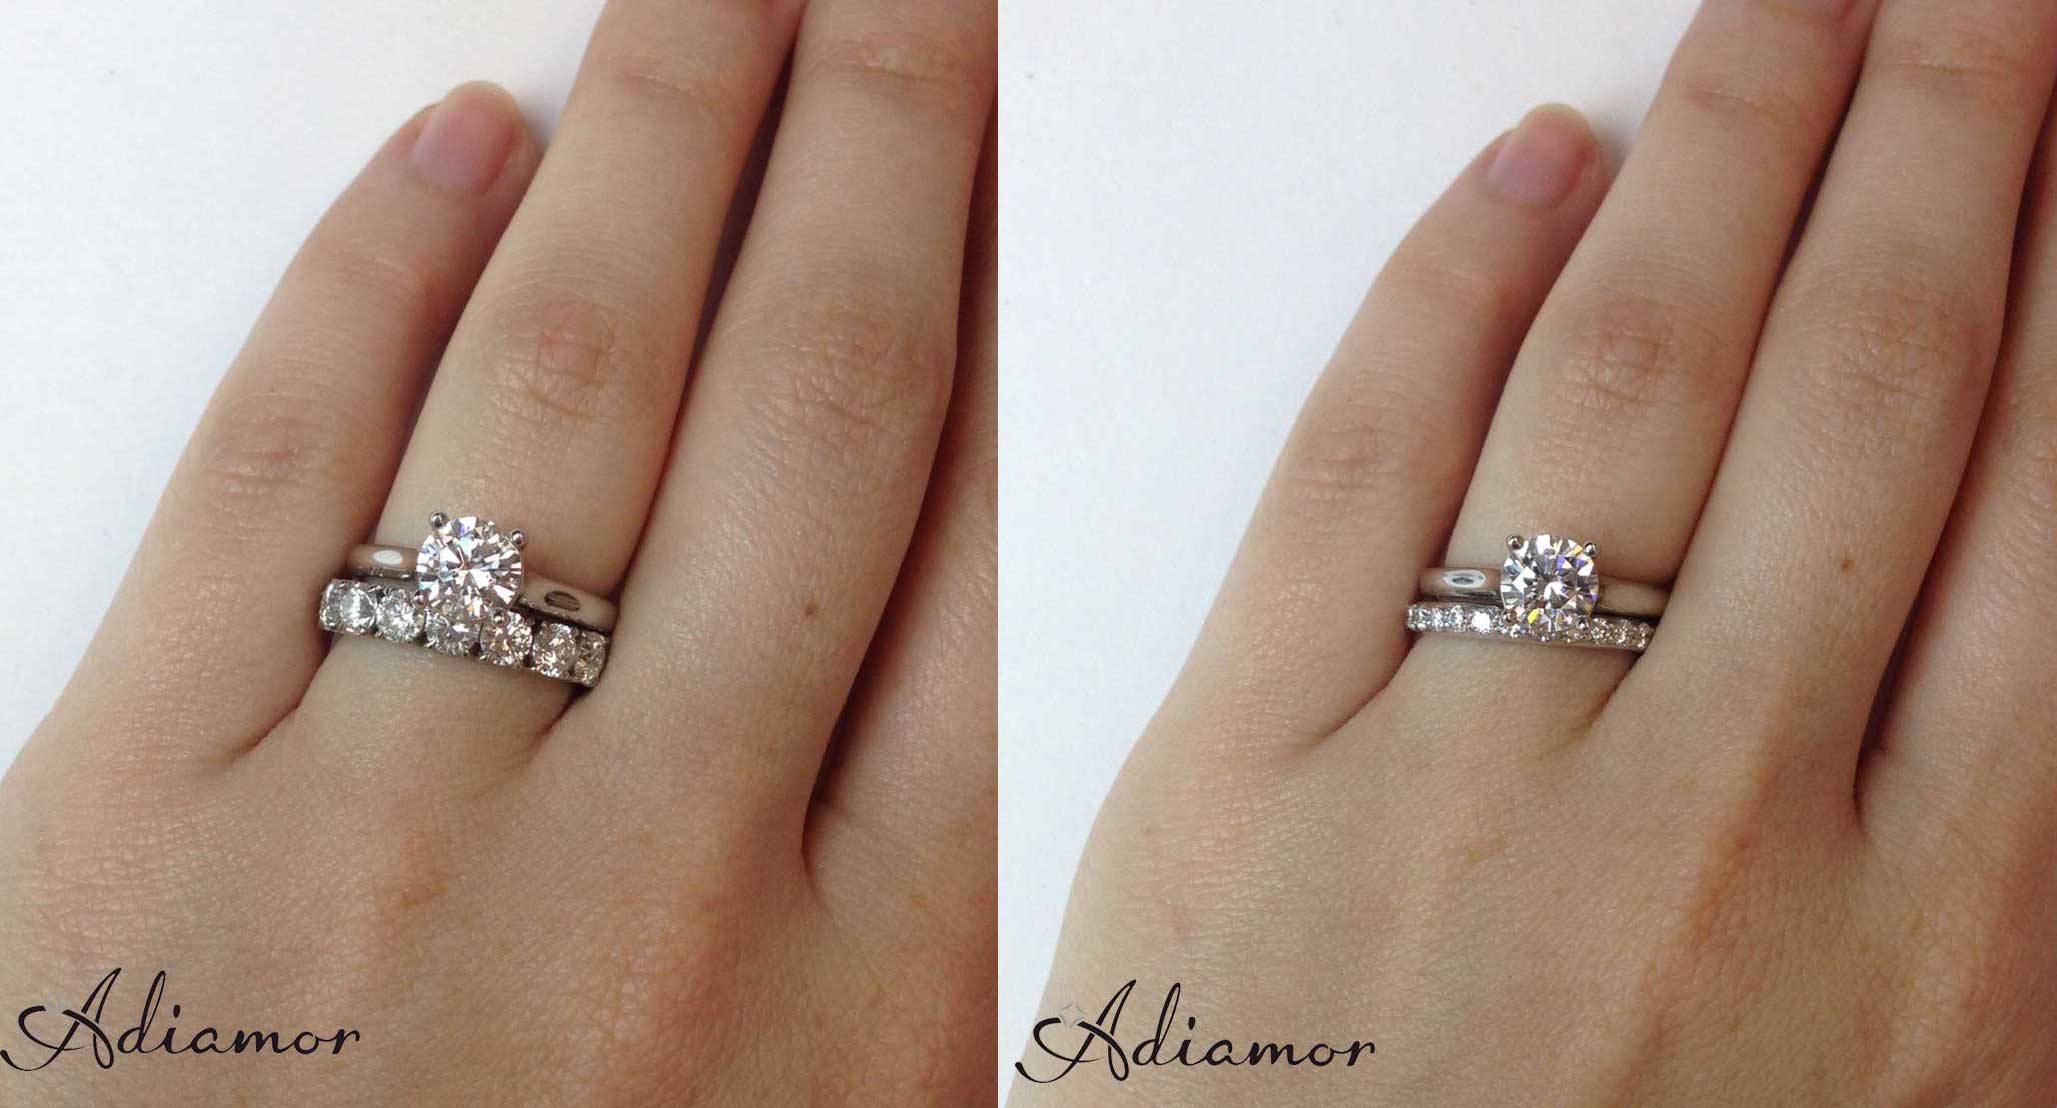 Hi! So what wedding band would go best with a reverse tapered